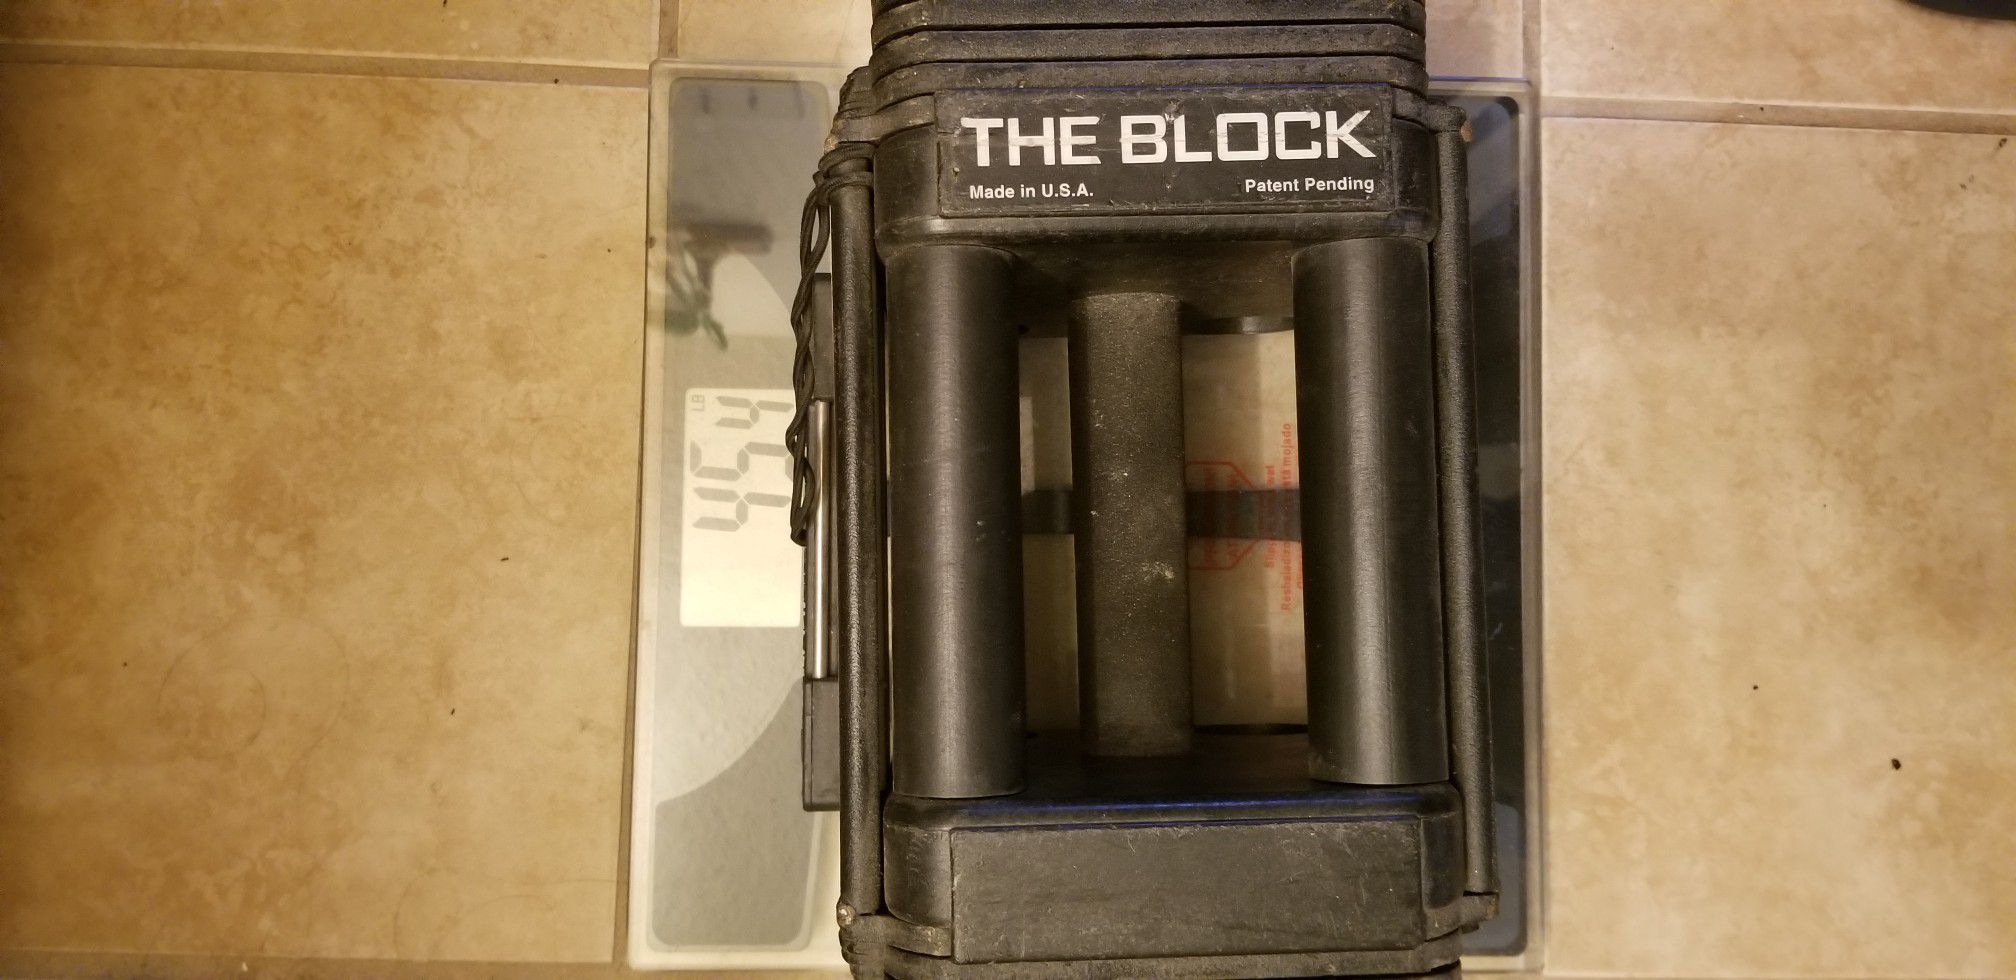 Powerblock weights, and extras